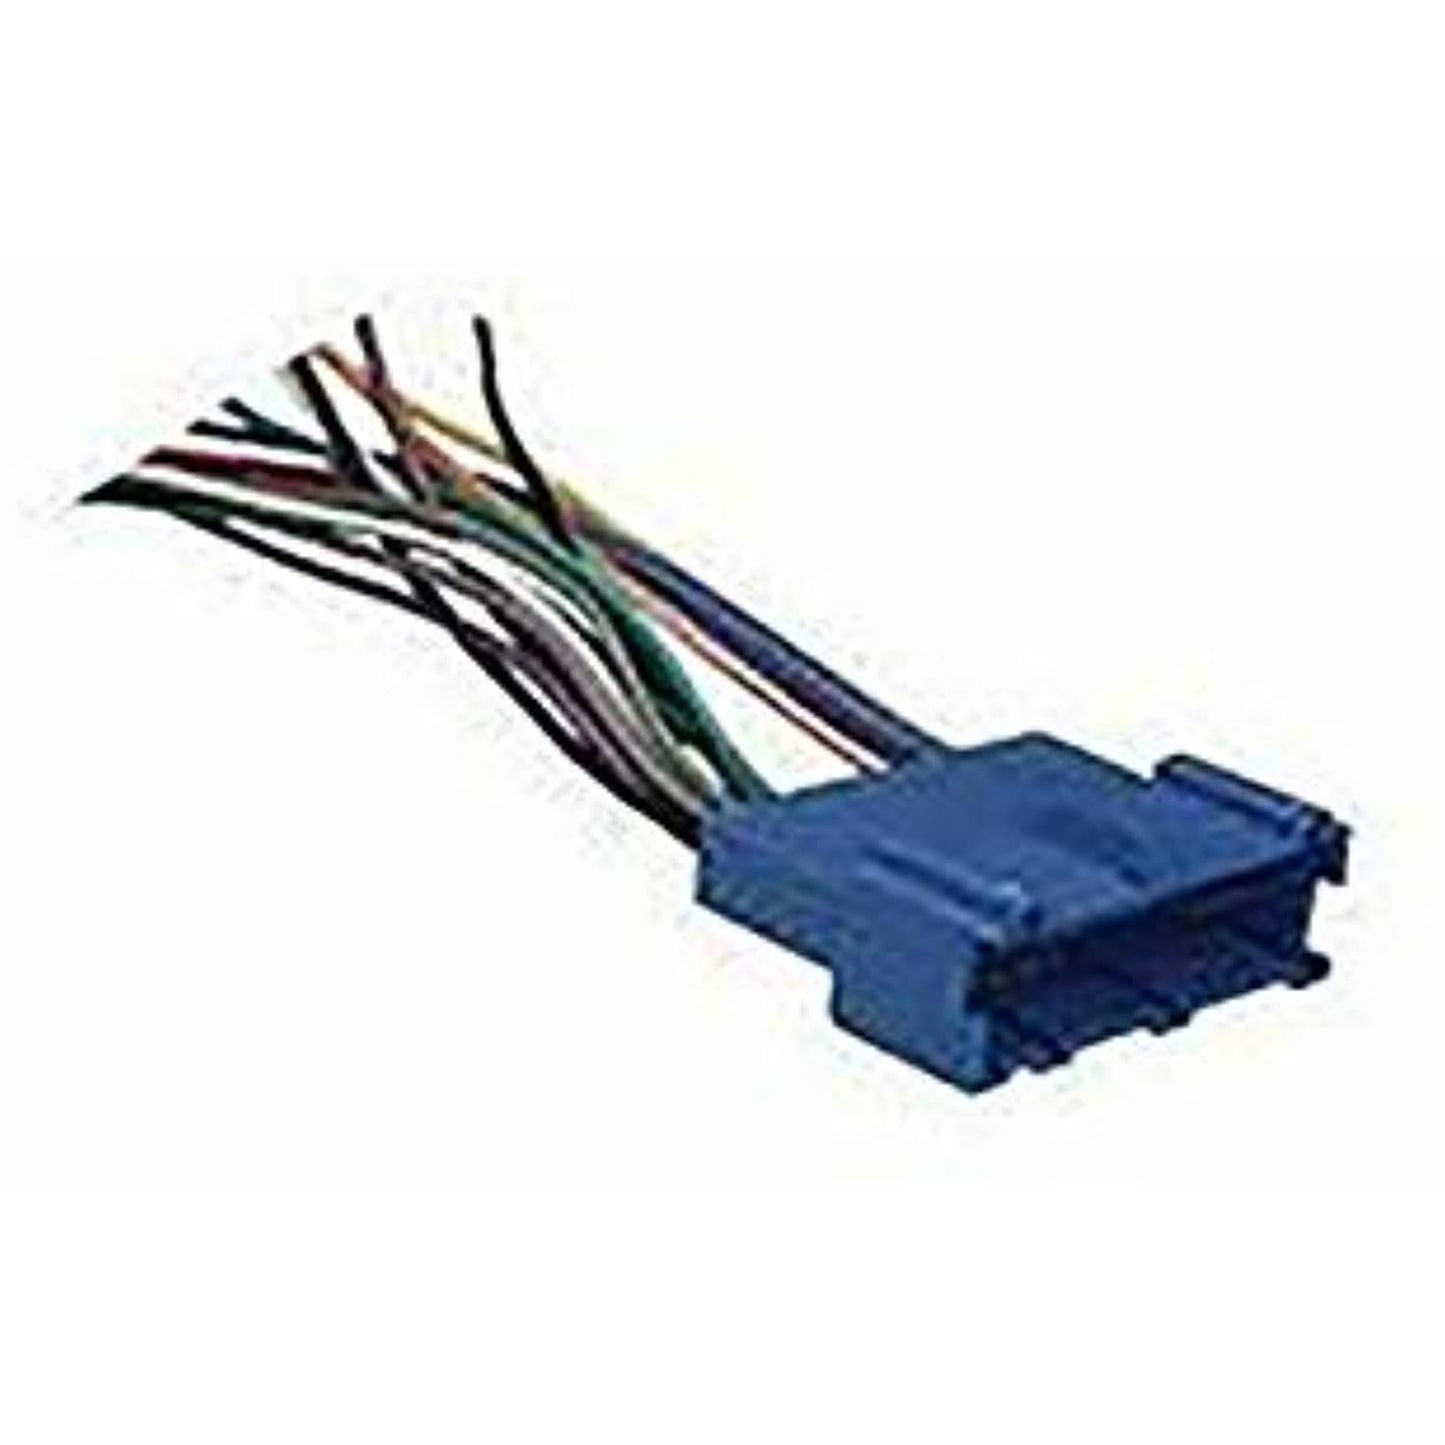 Metra RAPGM4002 GM 1994-Up Turbowire Harness (702001)